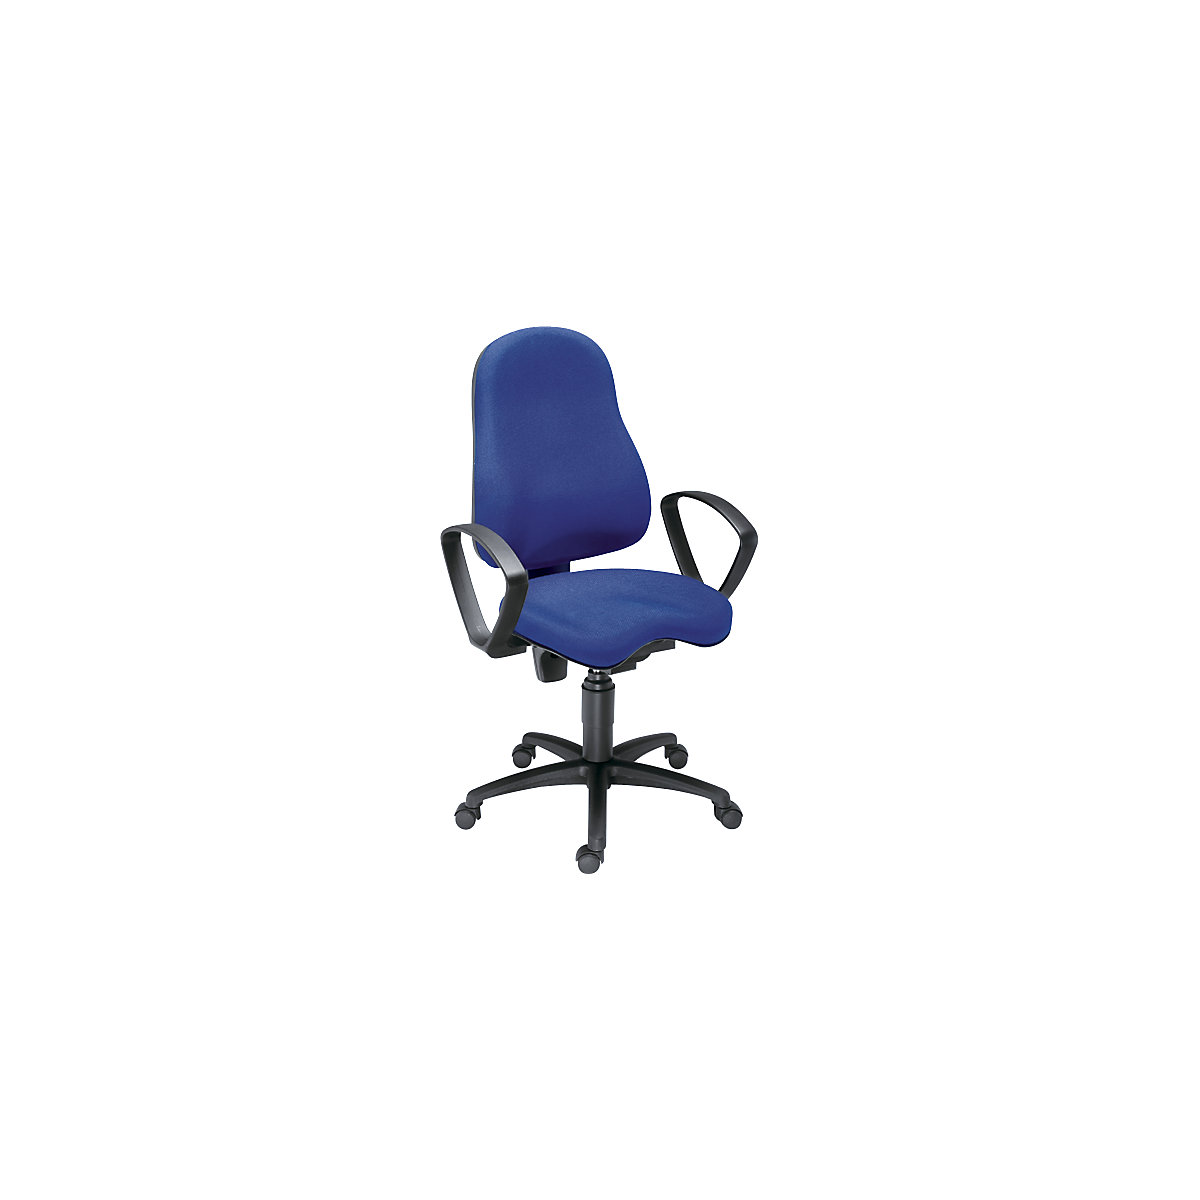 BALANCE 400 operator swivel chair – Topstar, with Body Balance Tec®, incl. arm rests, royal blue covering-4